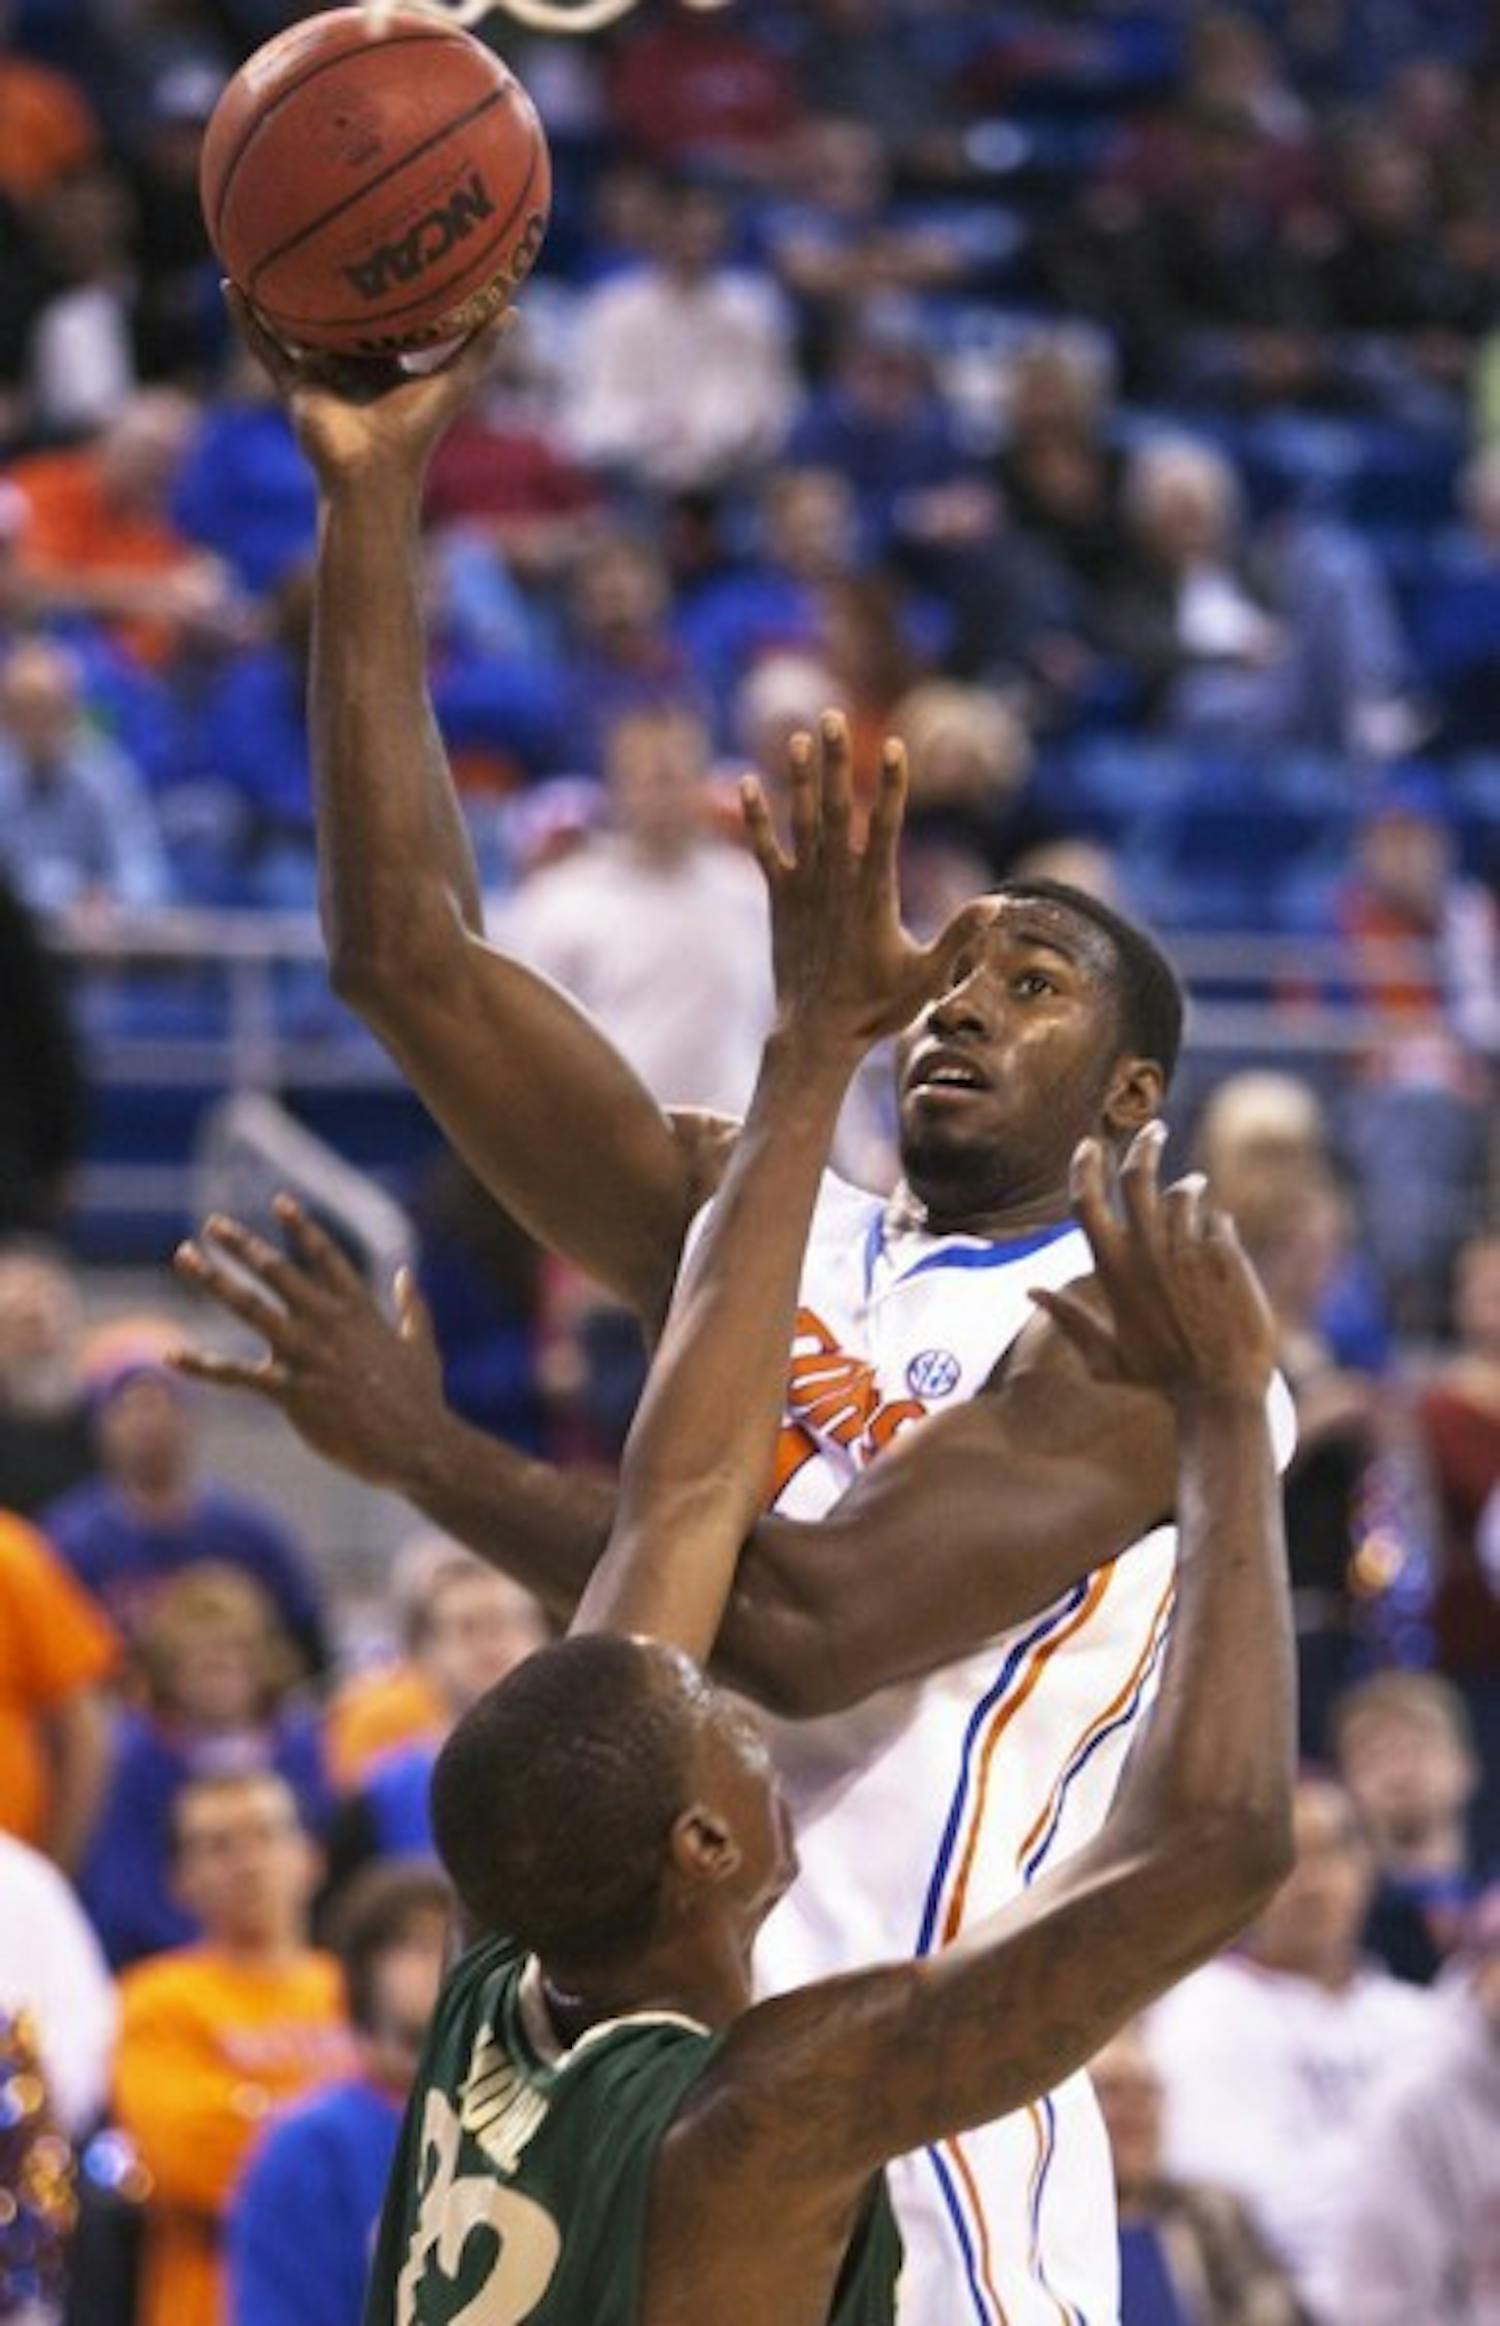 Sophomore center Patric Young scored 15 points and hauled in seven rebounds on a night when the Gators were out-rebounded 36-34 by the Blazers.